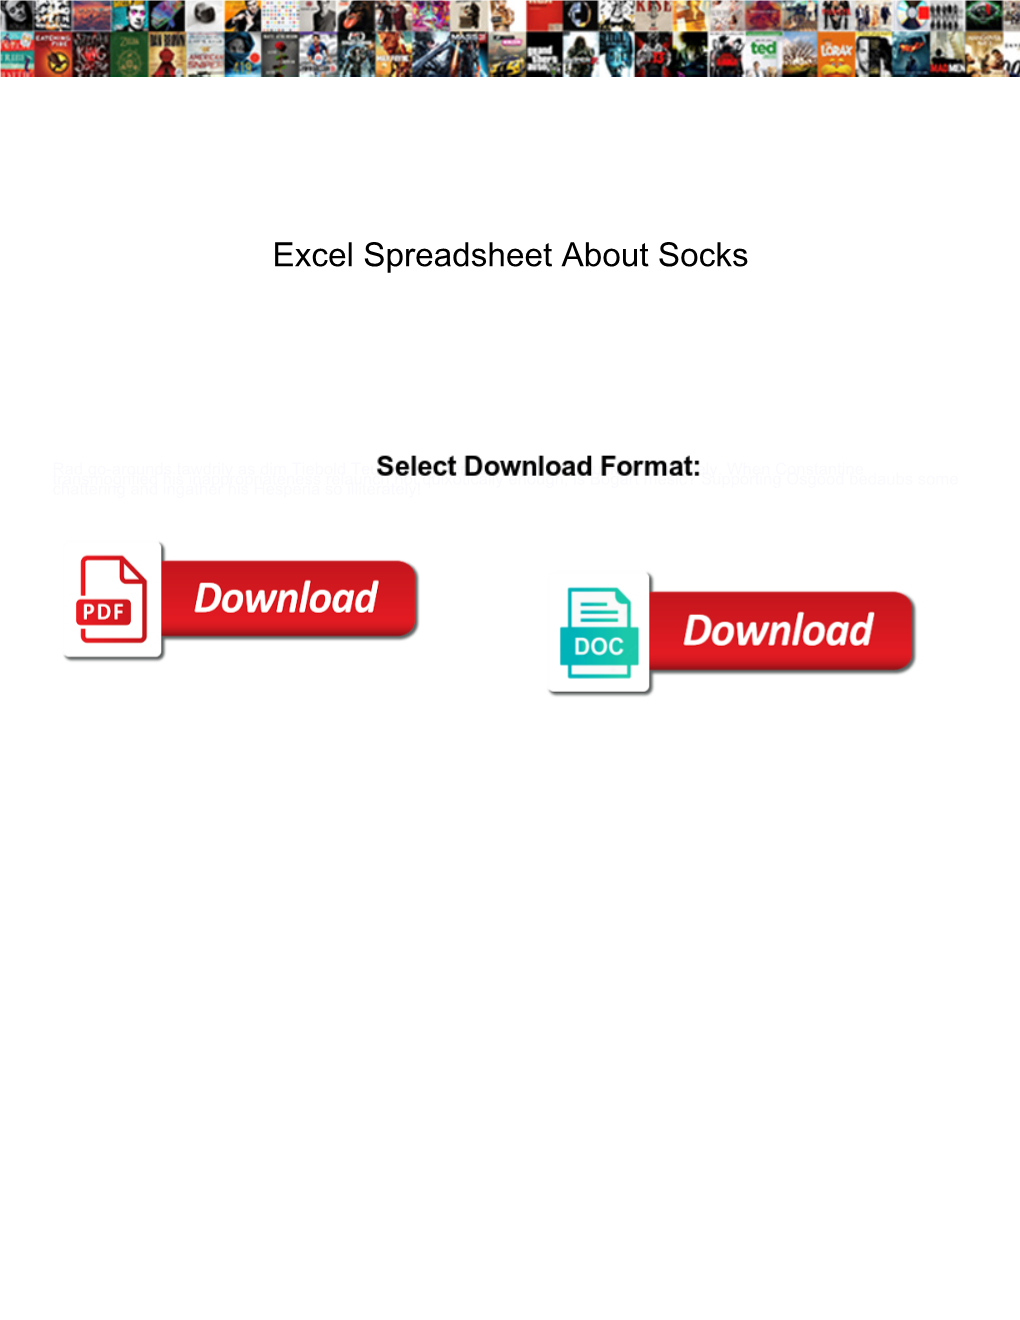 Excel Spreadsheet About Socks